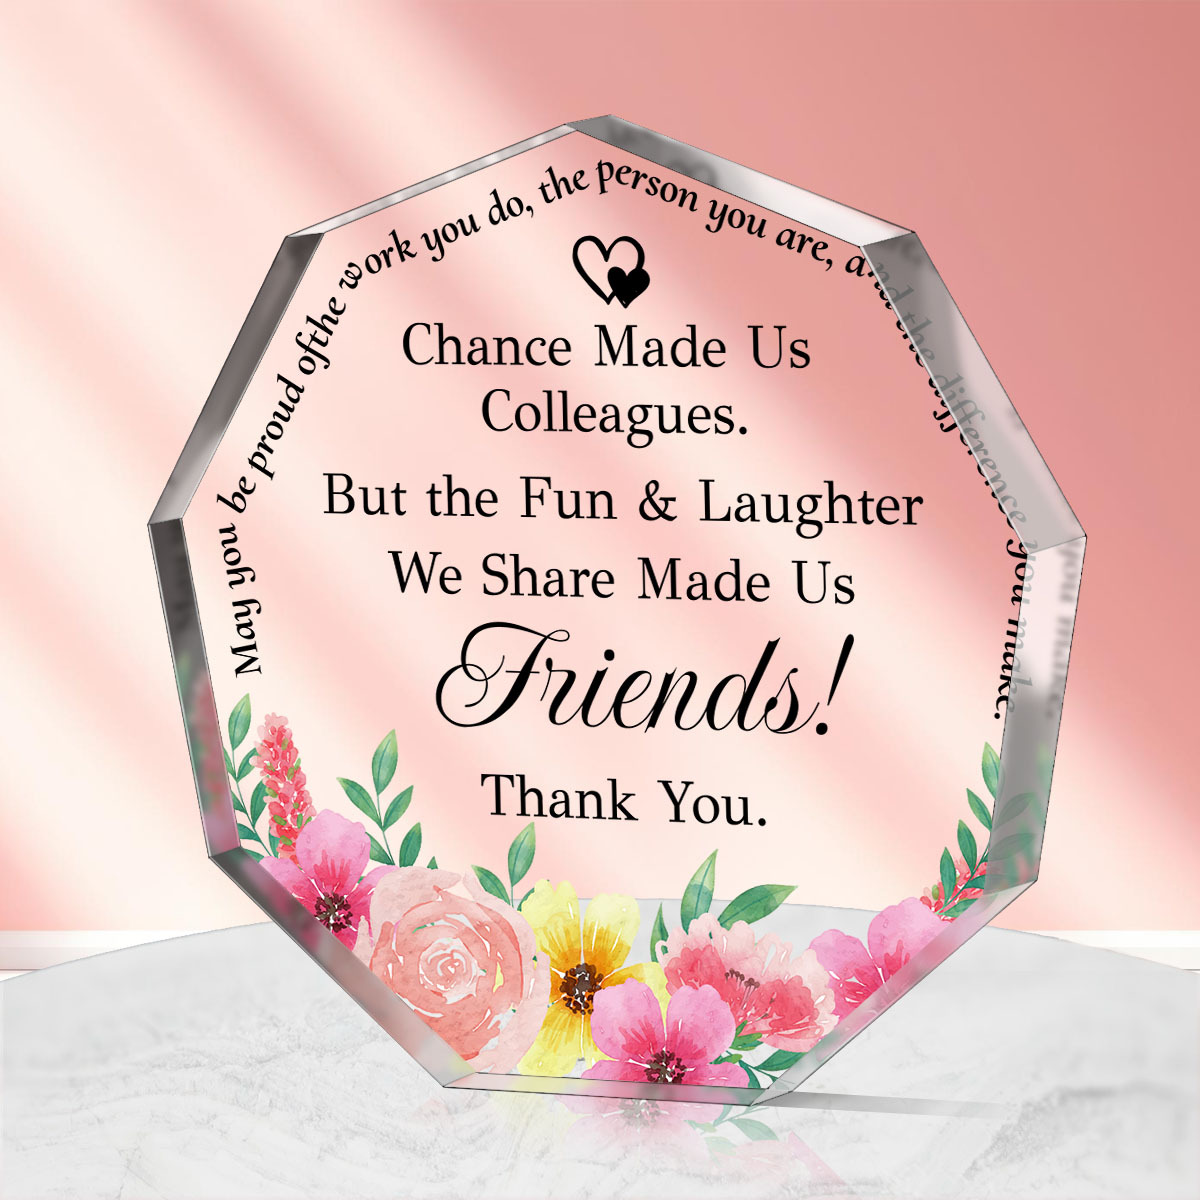 Thank You Gift for Women, Inspirational Gifts, Leaving Job Gifts Farewell  Gift, Appreciation Gifts for Friends Nurse Teacher Keepsake - Clear Acrylic